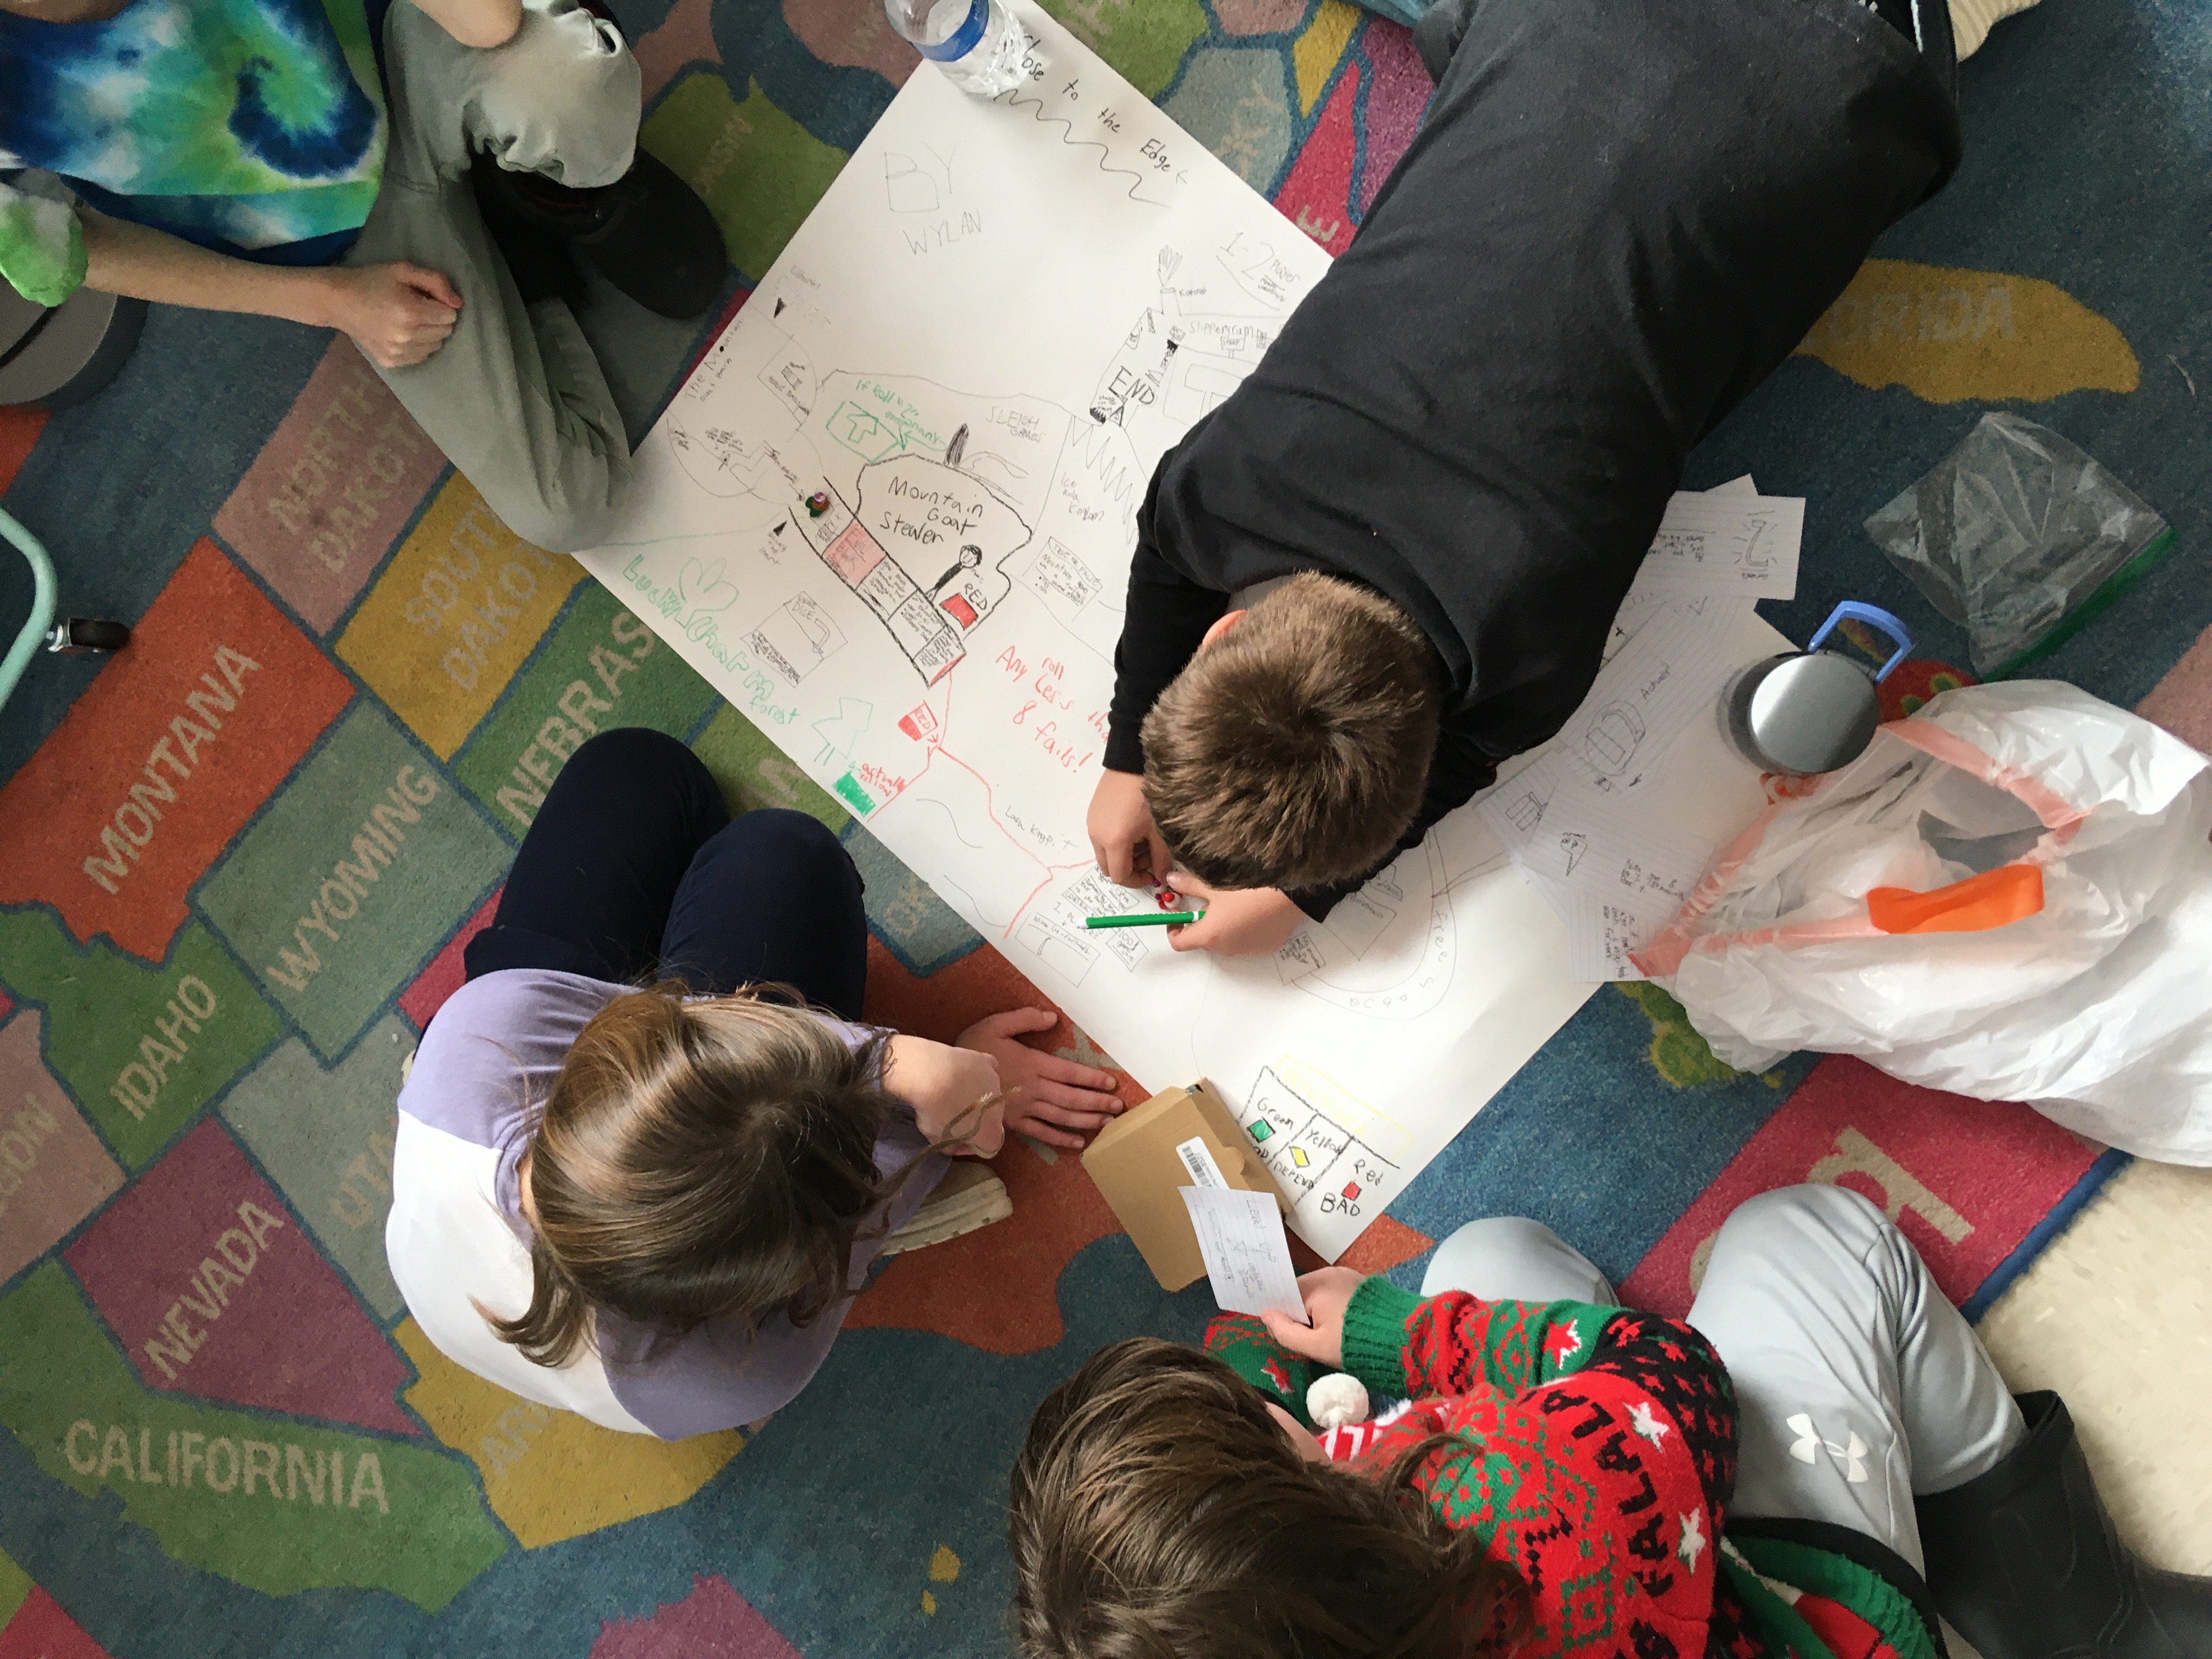 Four students pictured from above sit on the floor playing a student made board game.